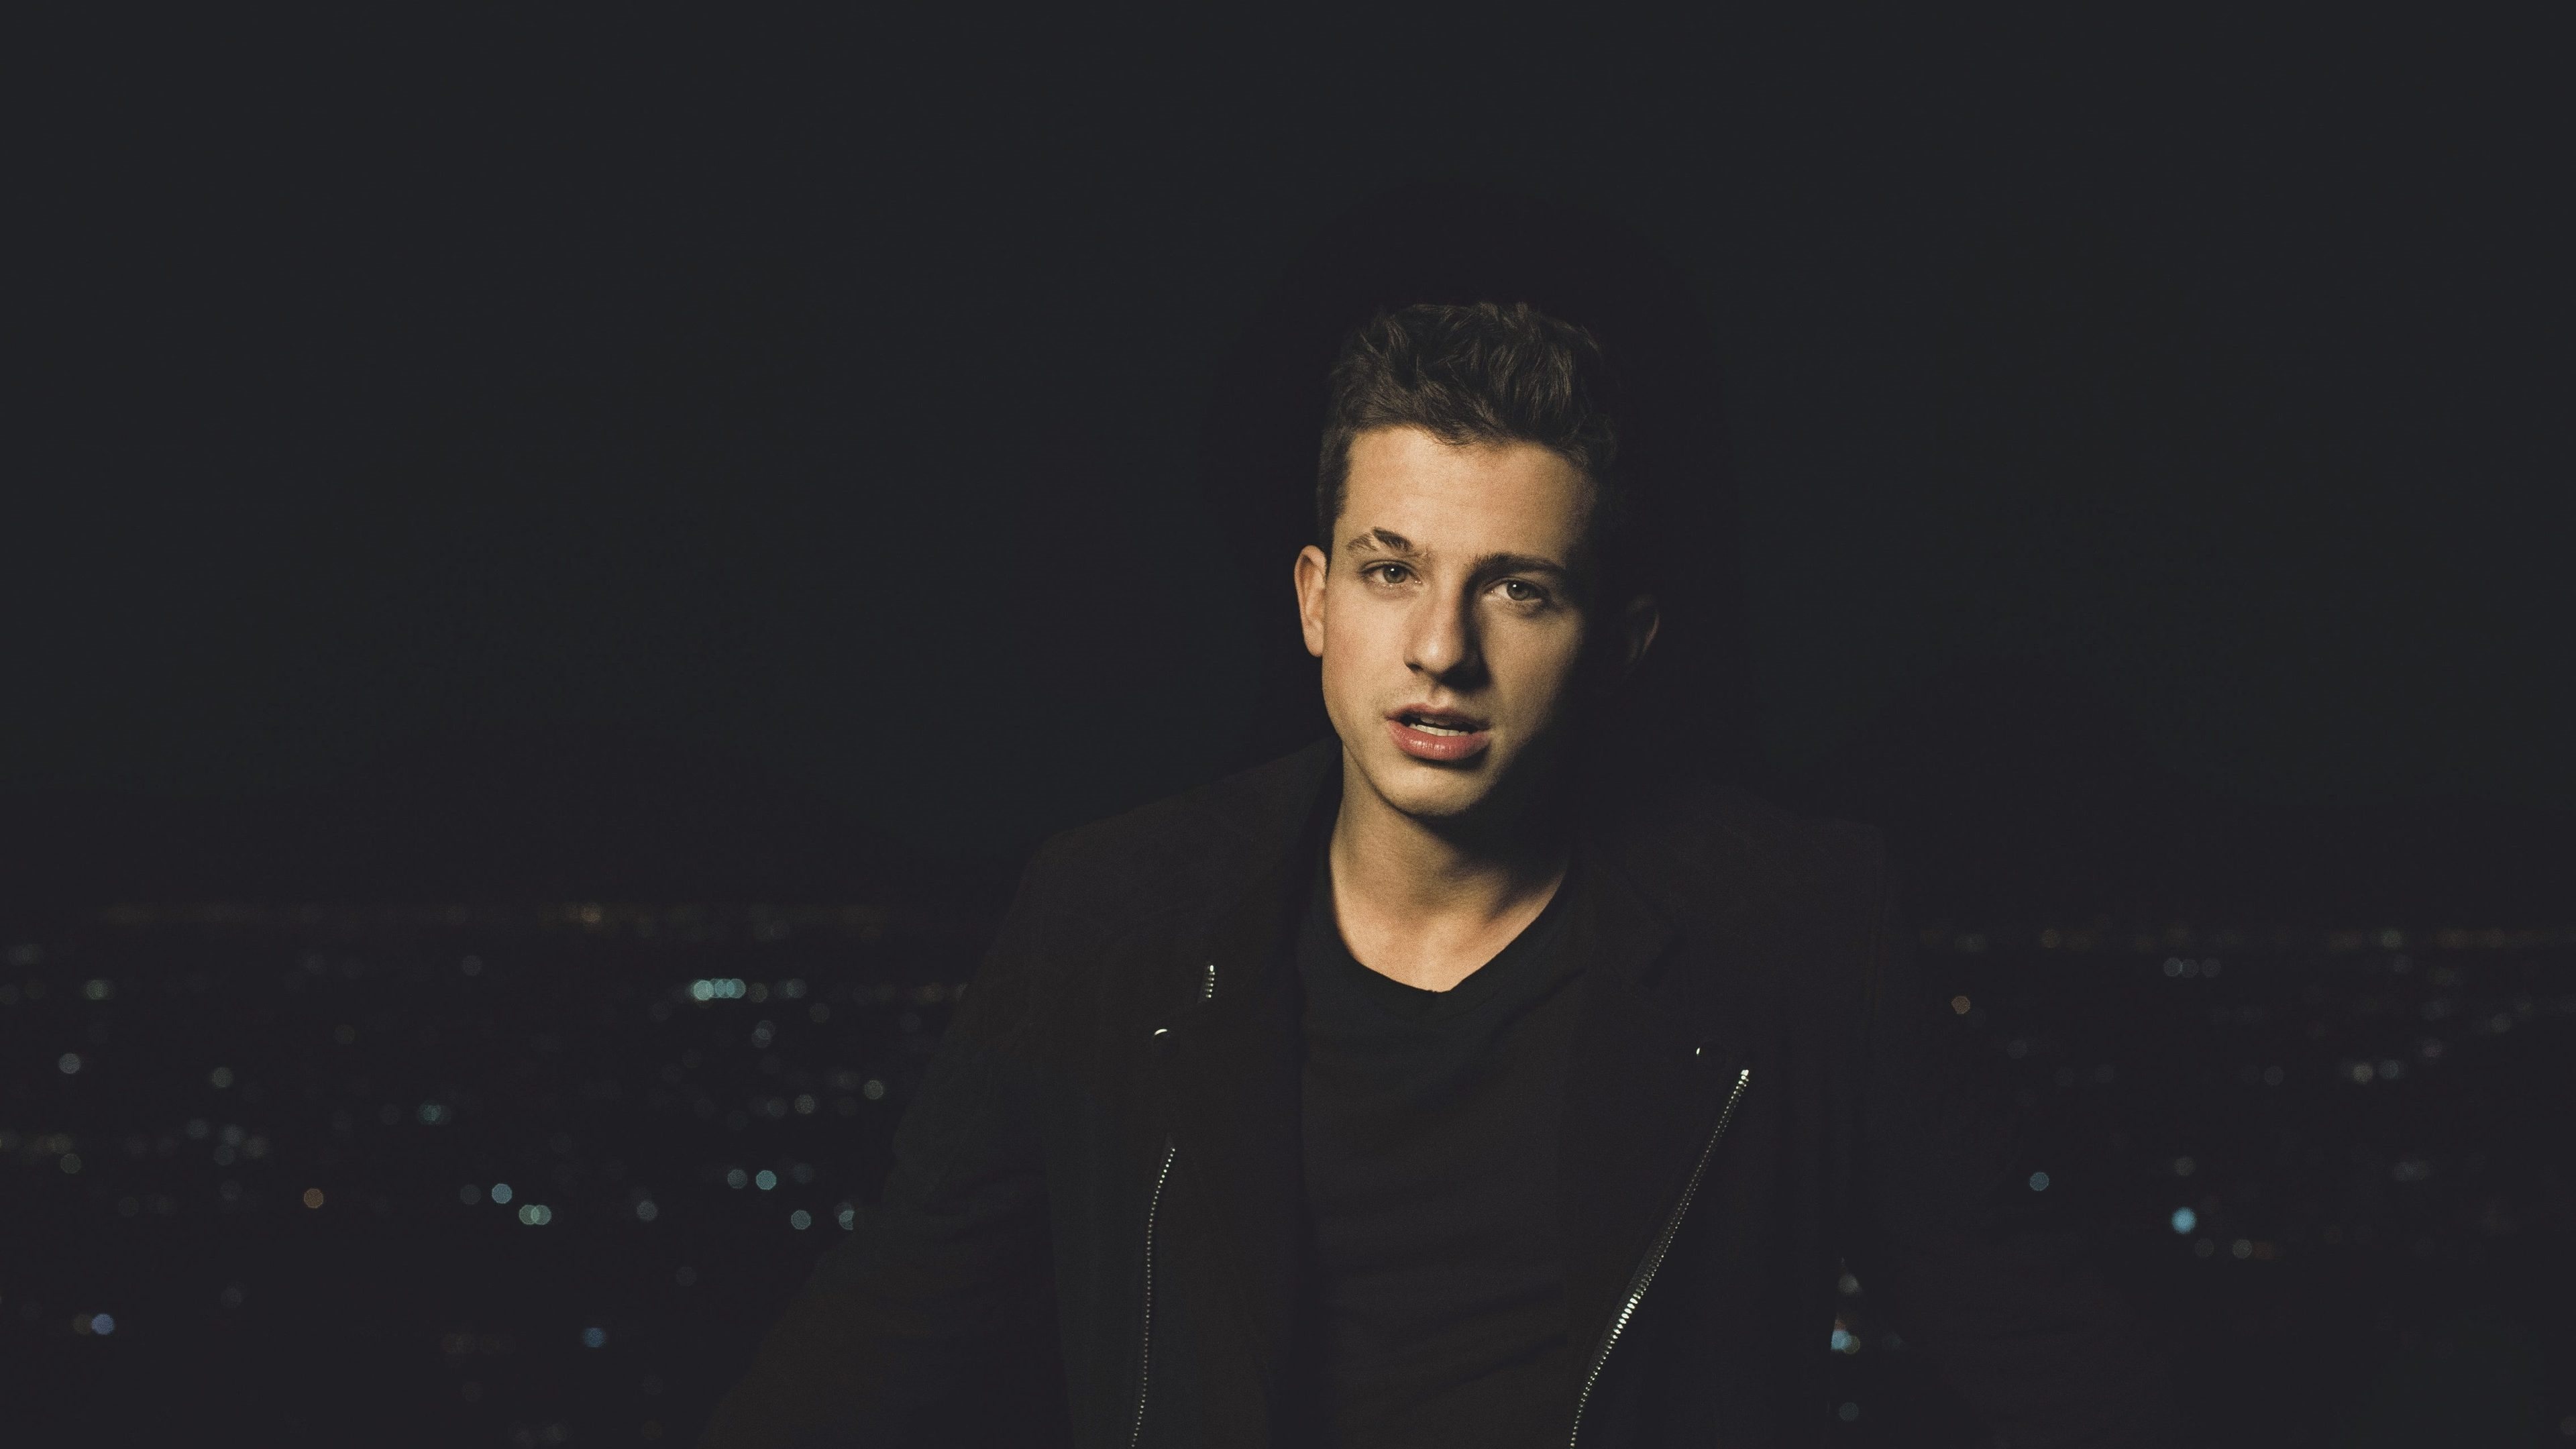 Charlie Puth: American singer, songwriter, and record producer. 3840x2160 4K Background.